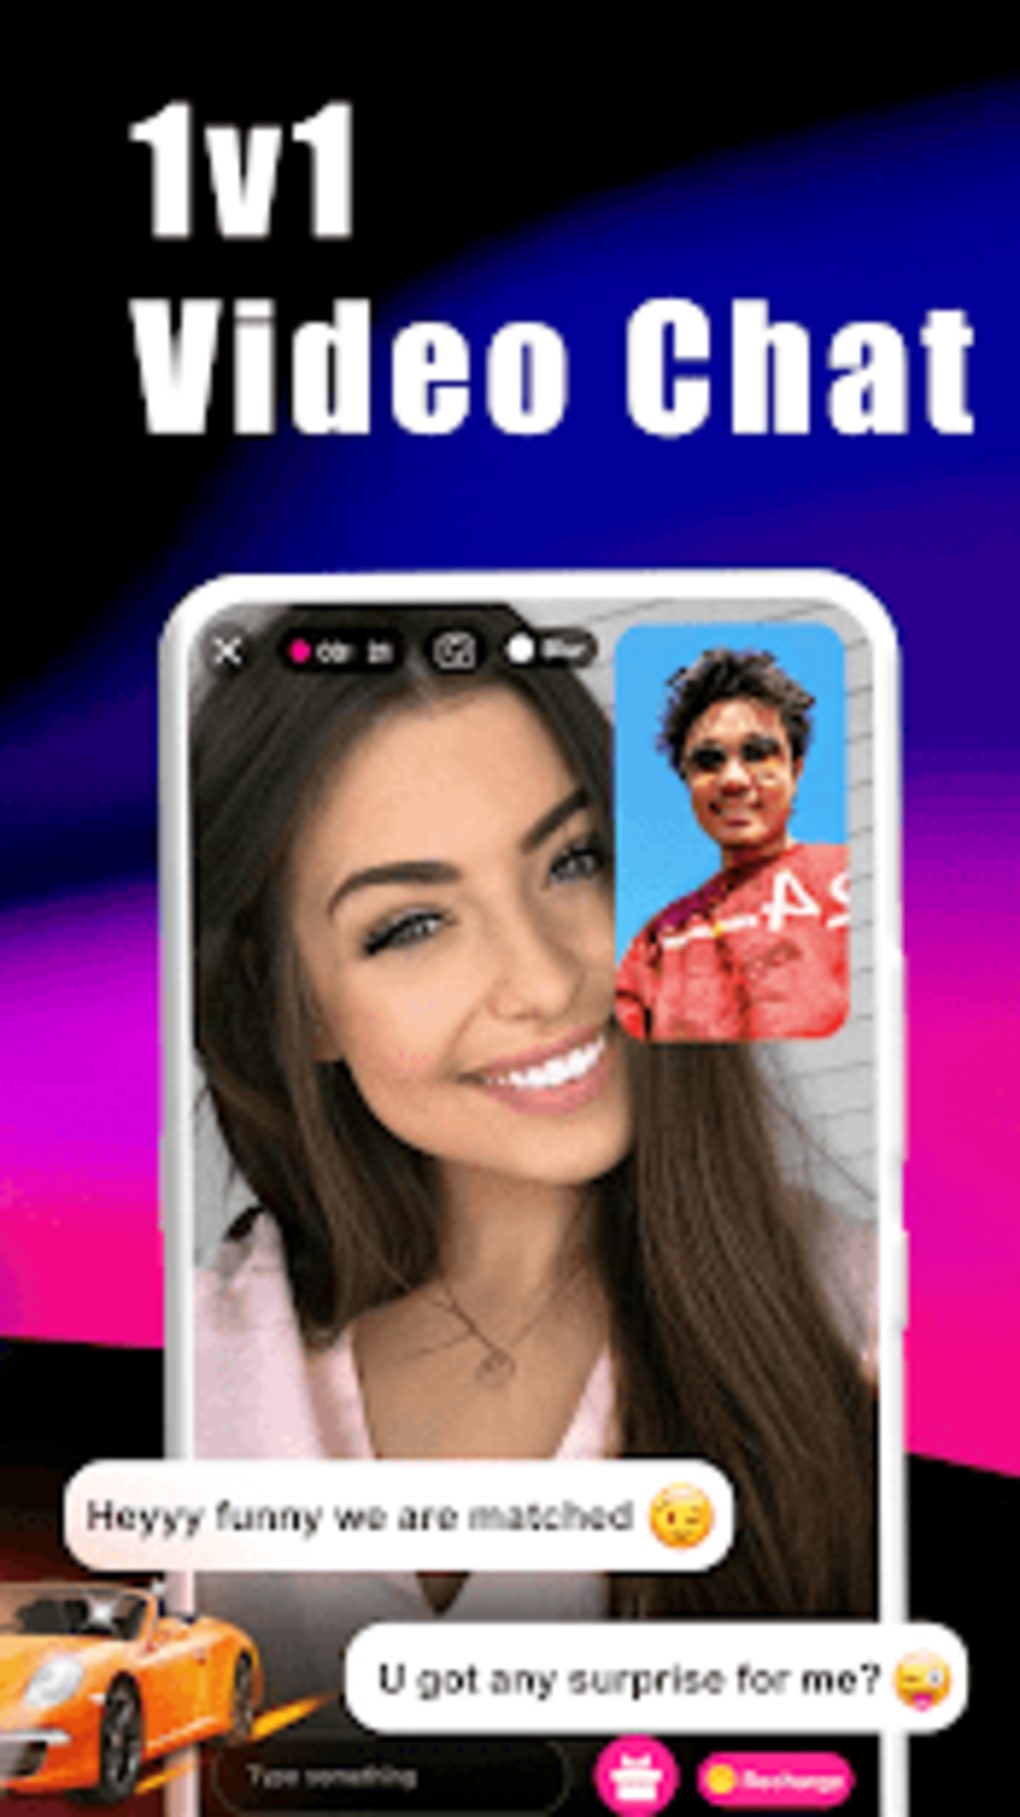 Video chat with random app